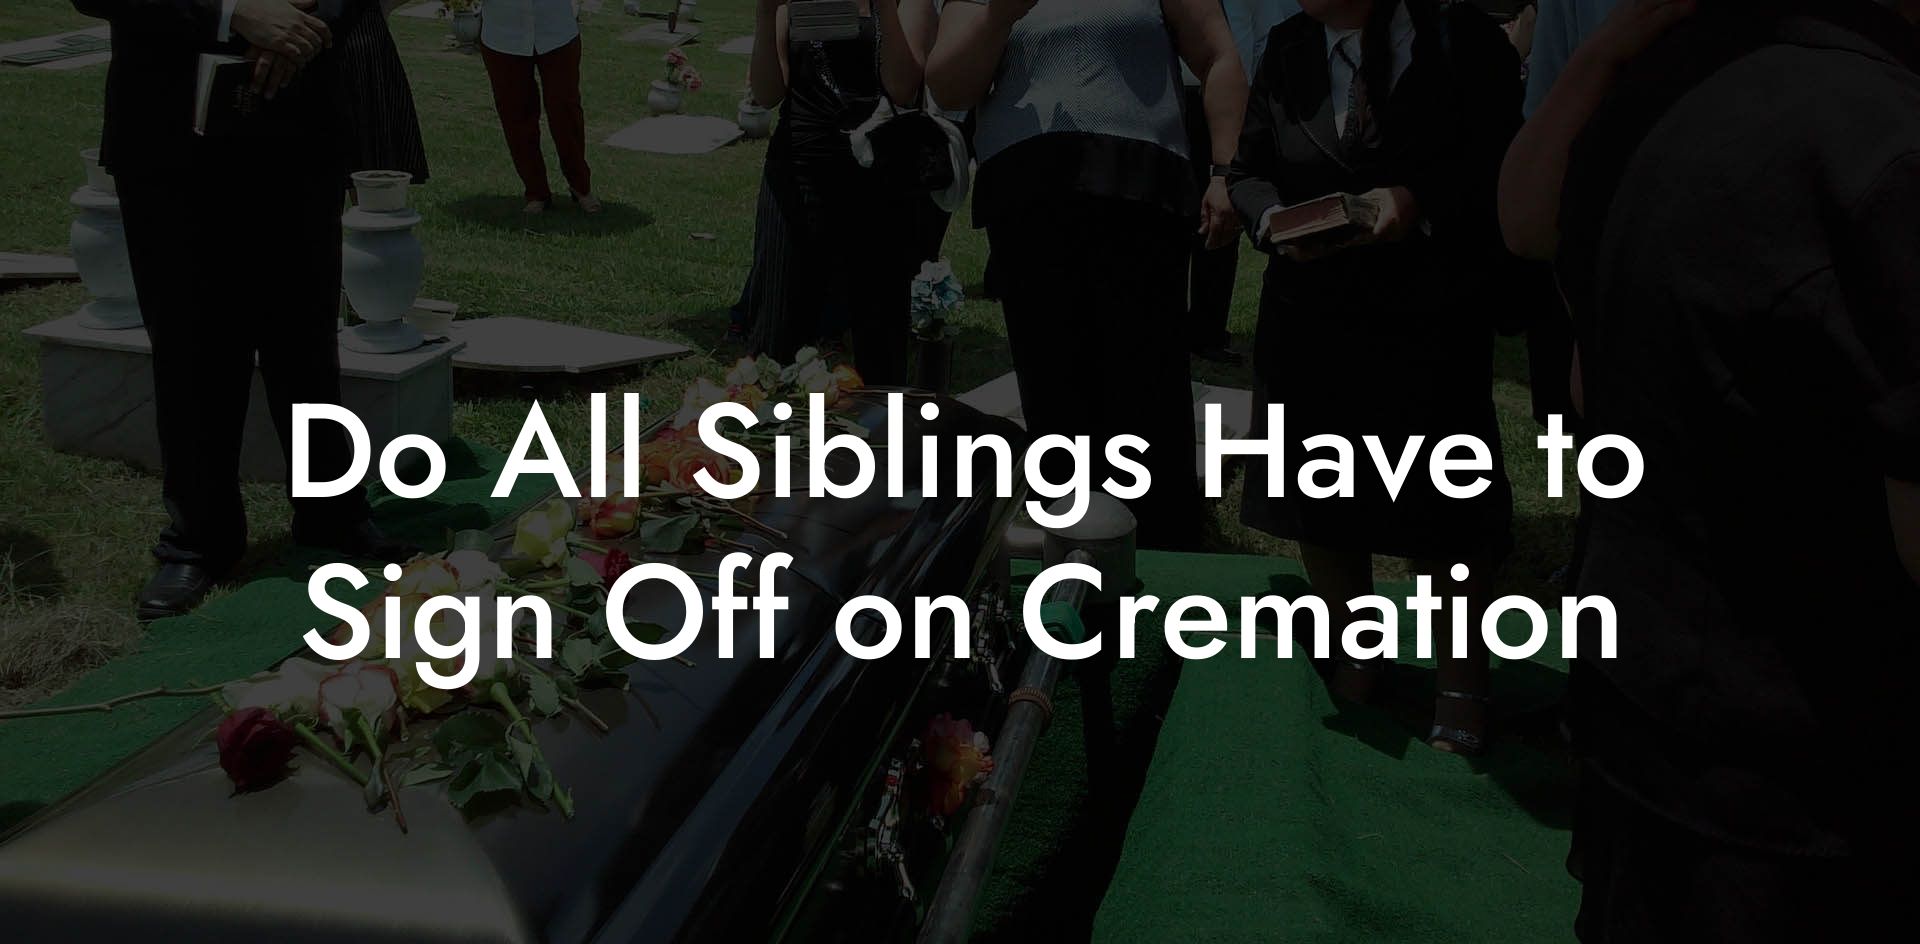 Do All Siblings Have to Sign Off on Cremation